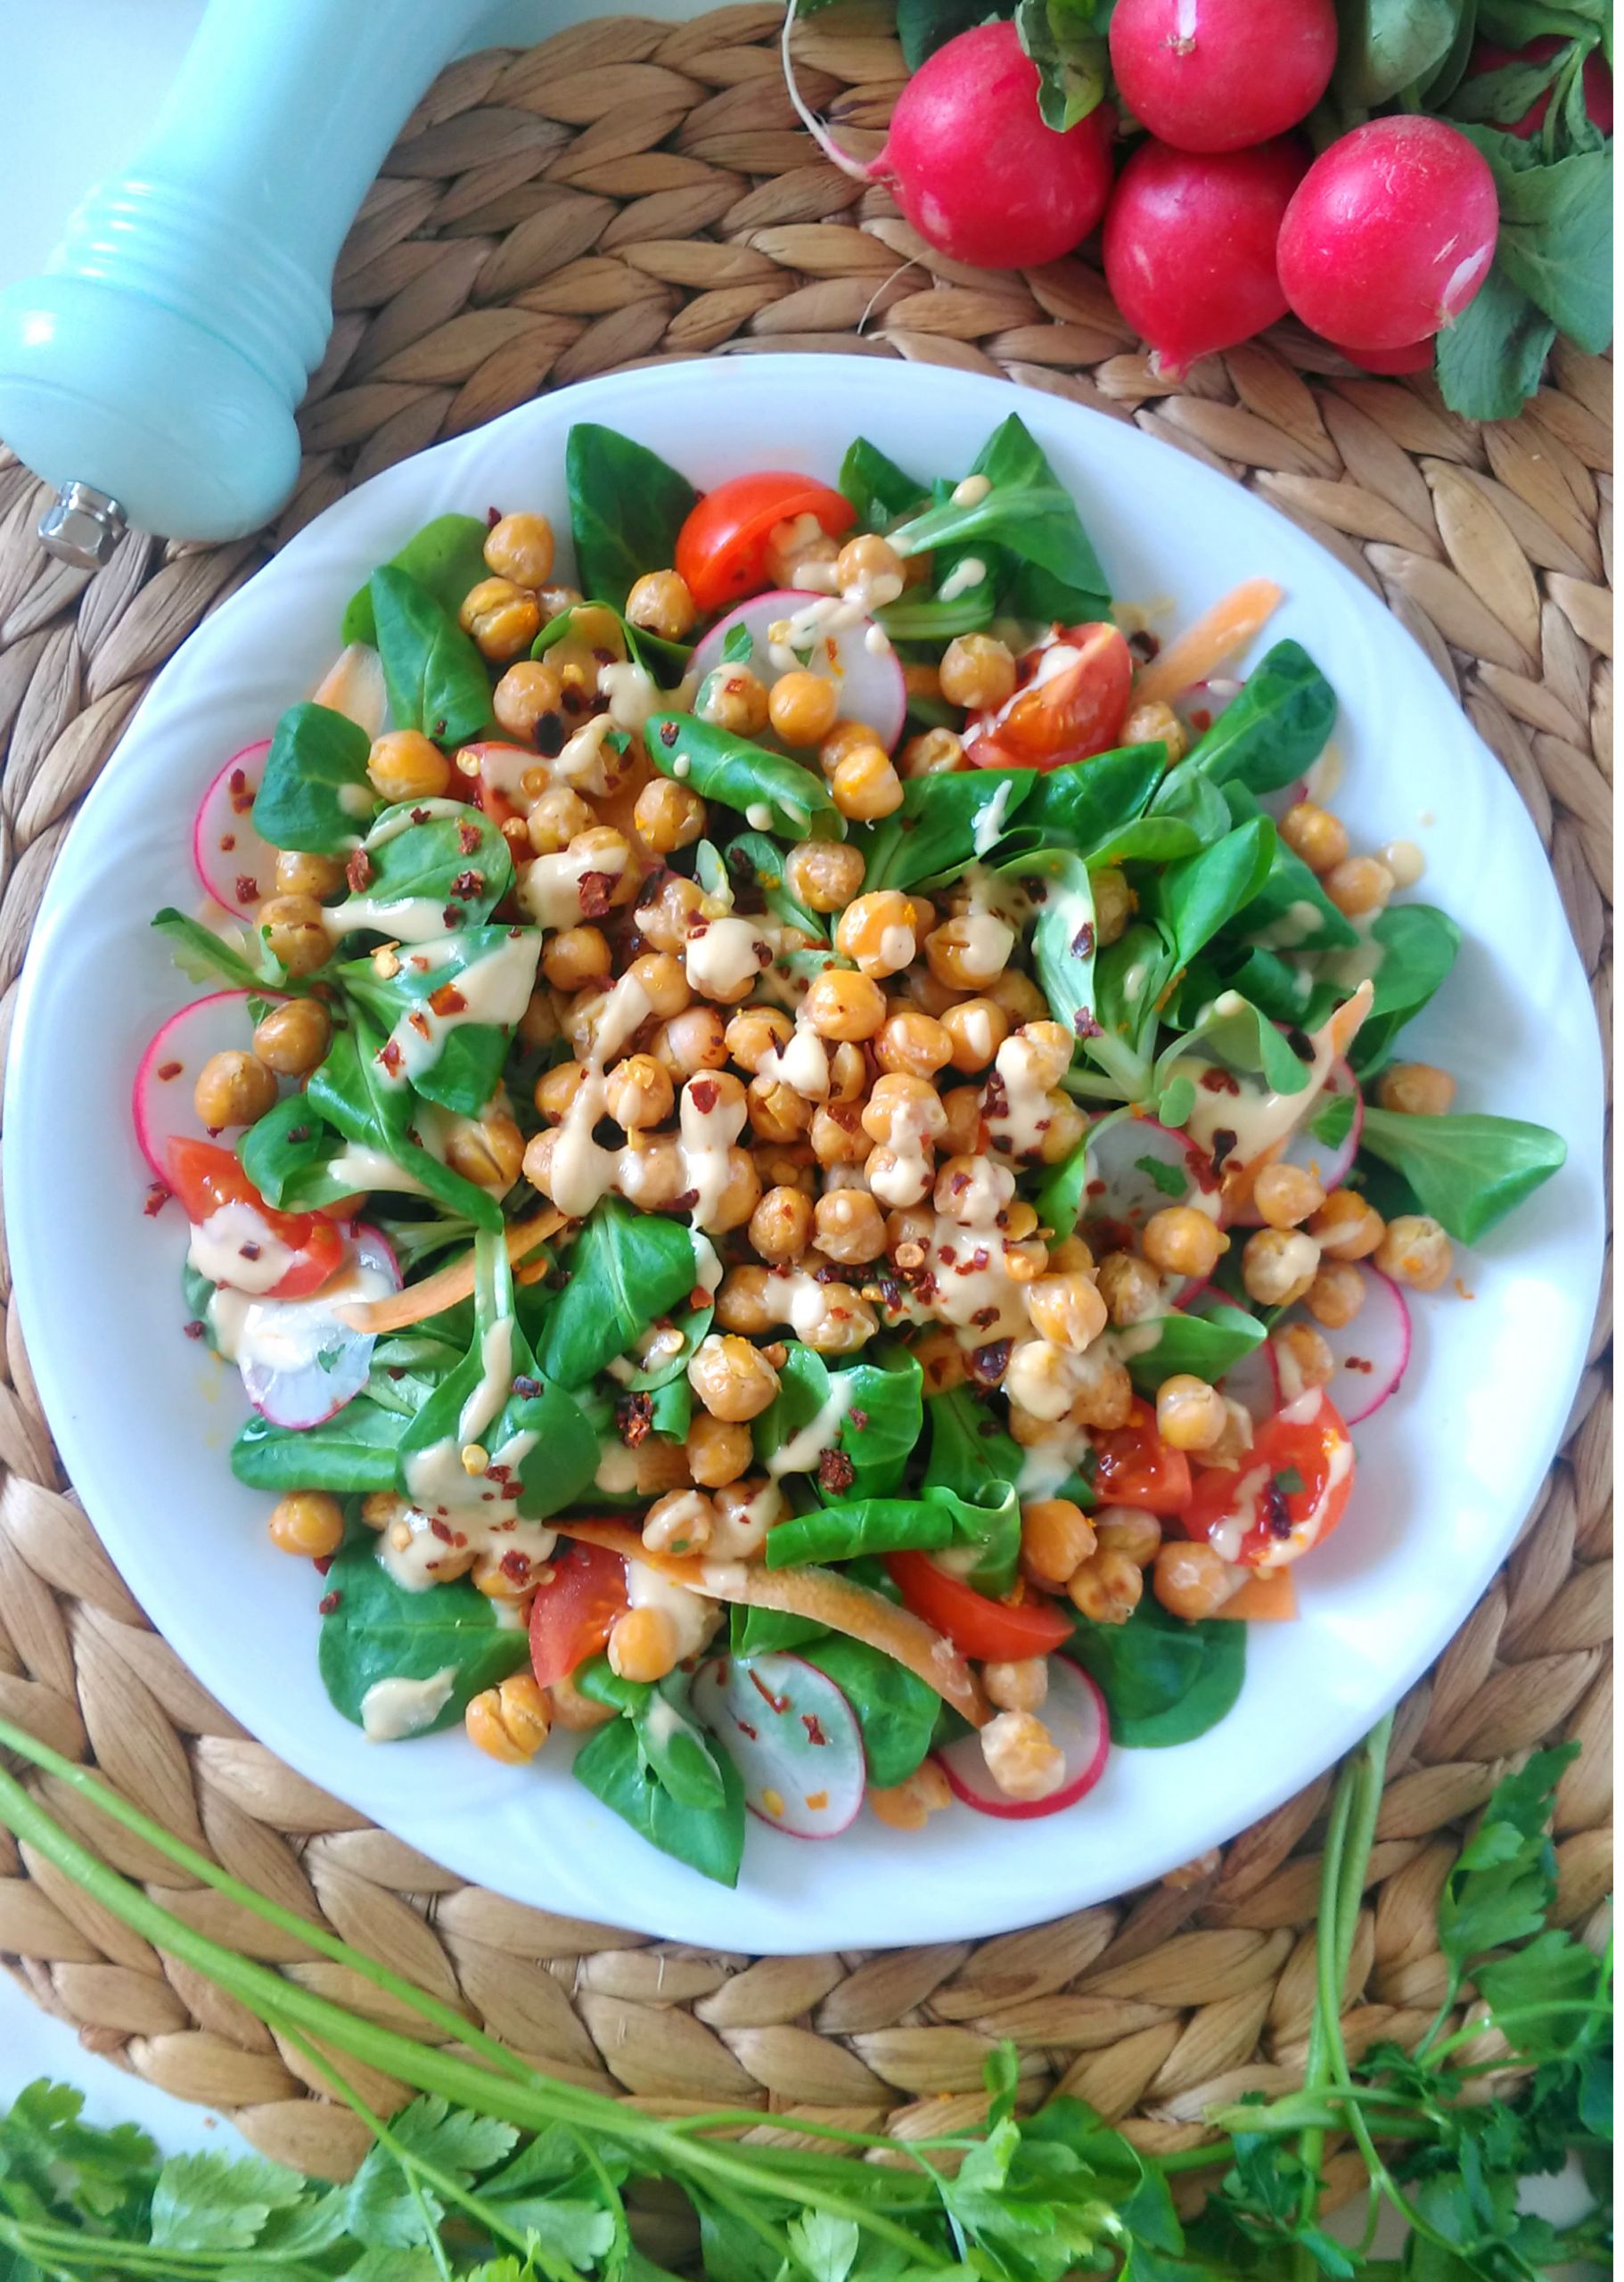 Chickpeas Recipes For Baby
 SPINACH AND RADISH SALAD WITH ROASTED CHICKPEAS AND TAHINI